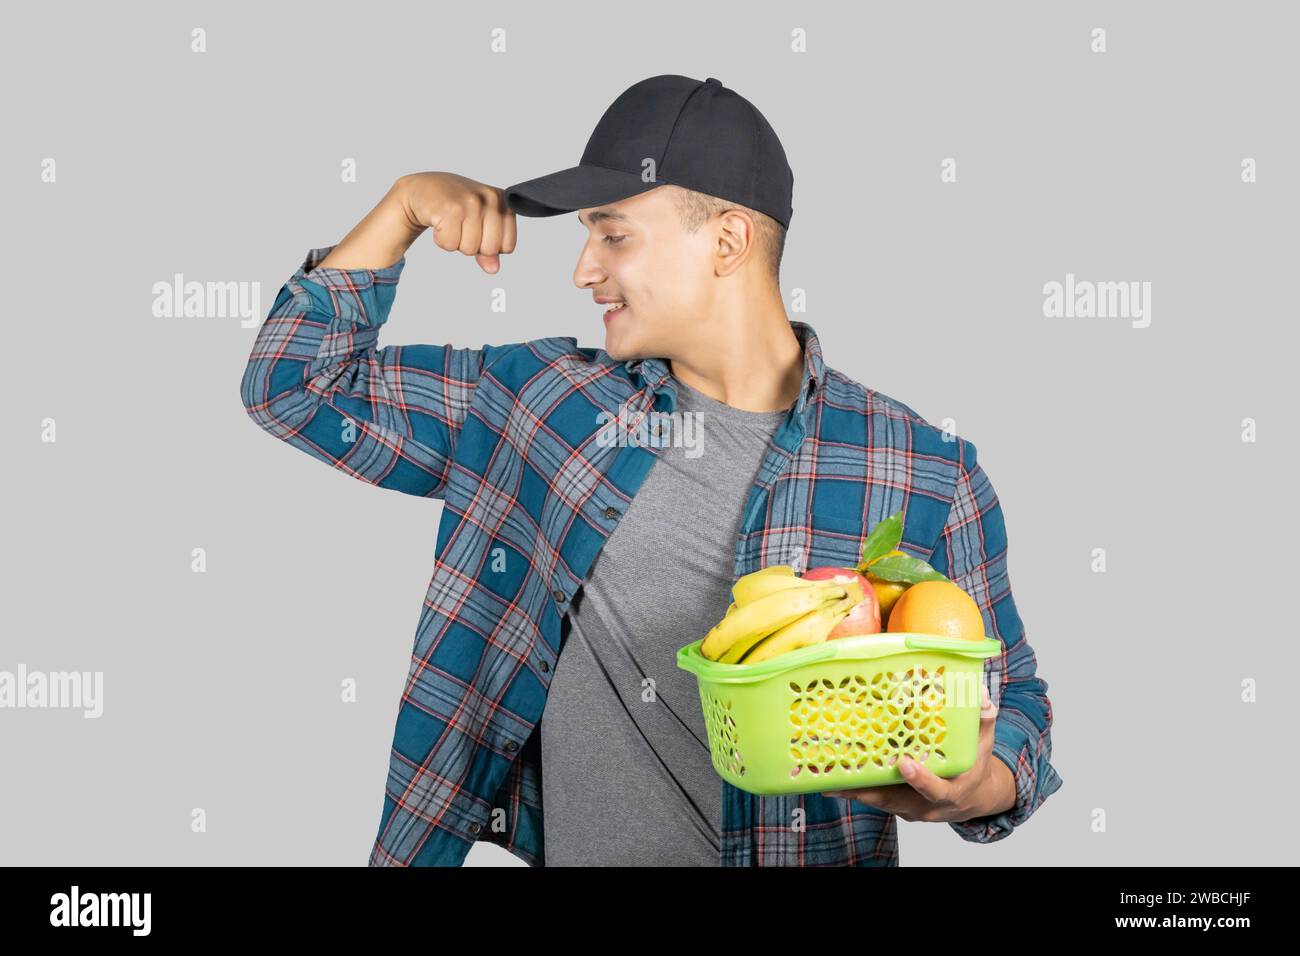 Young Asian Muscular and Healthy Male Farmer Promoting Organic Lifestyle with Fruit and Fruit Basket Stock Photo